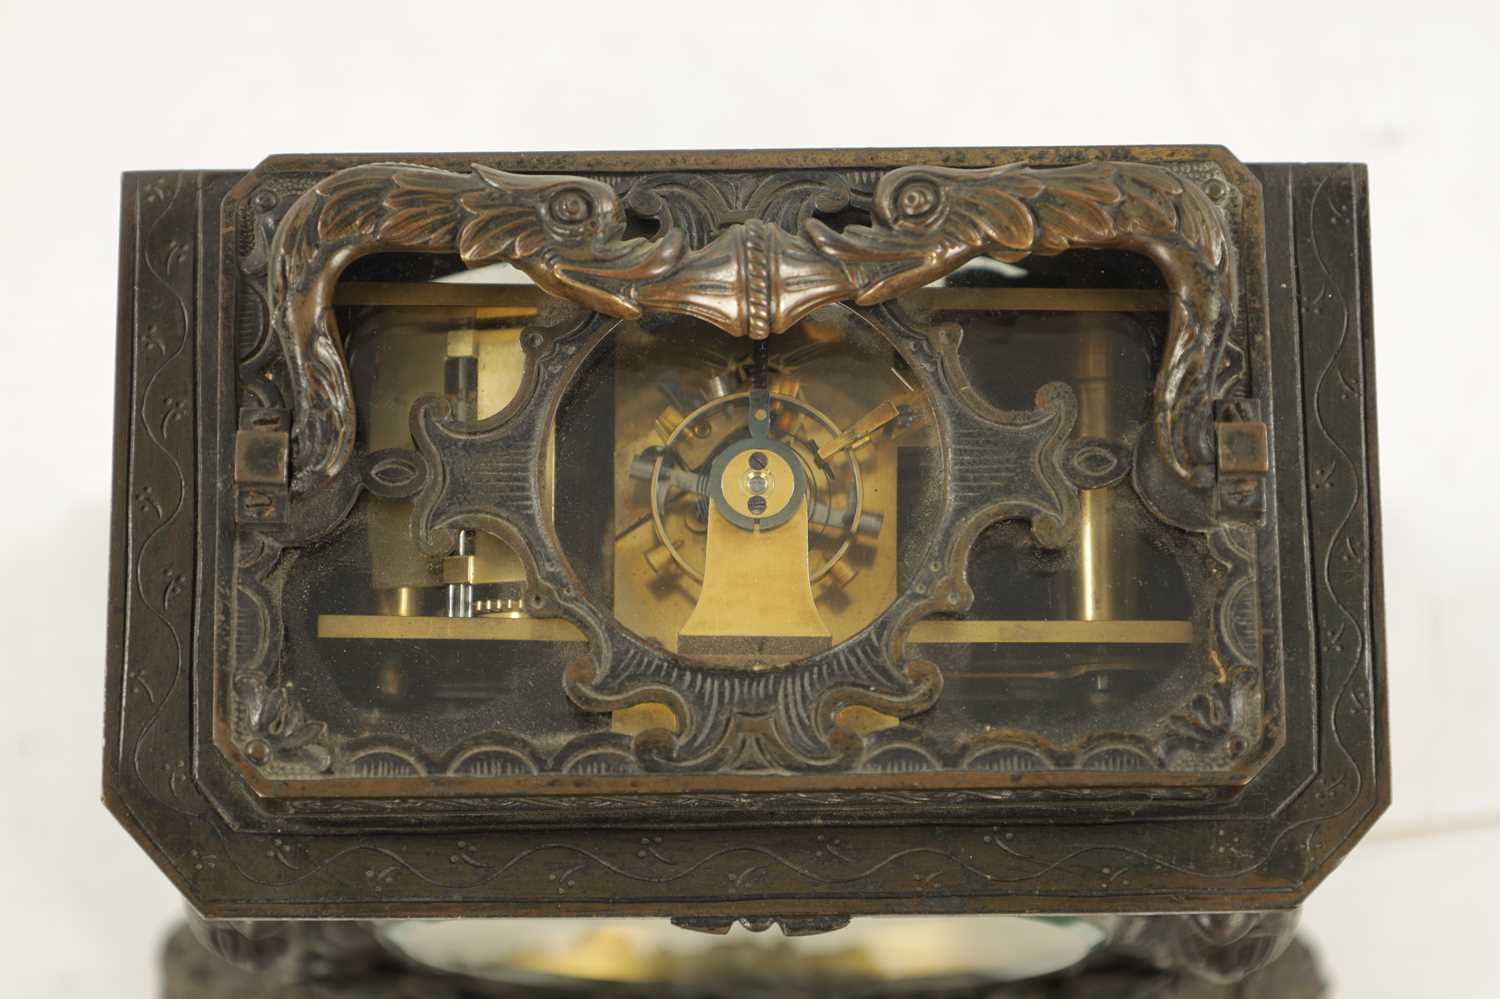 FRENCH, ROYAL EXCHANGE, LONDON. A MID 19TH CENTURY DOUBLE FUSEE REPEATING GIANT CARRIAGE CLOCK - Image 4 of 12